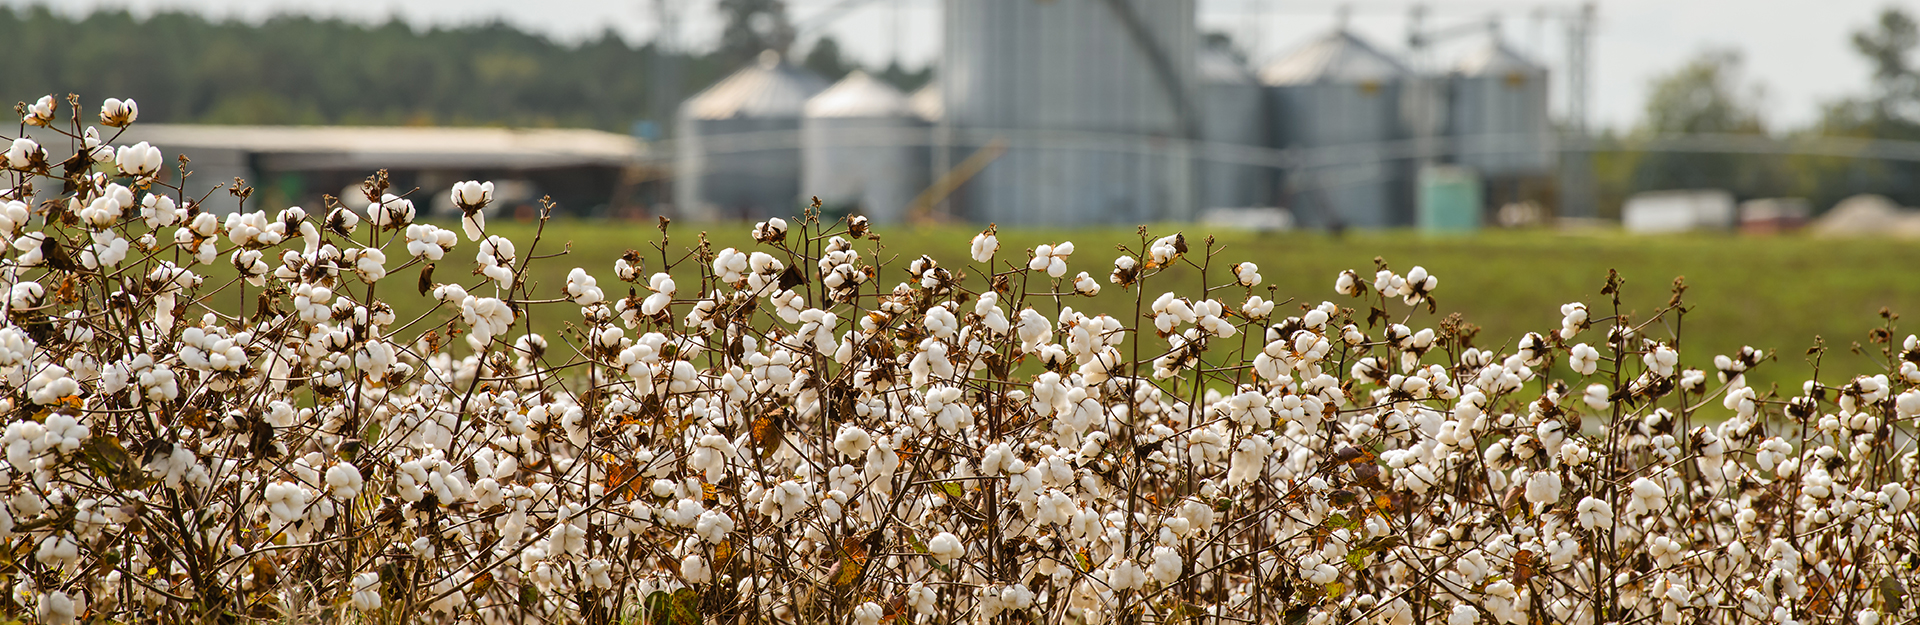 cotton plants in row crops with silos in the background